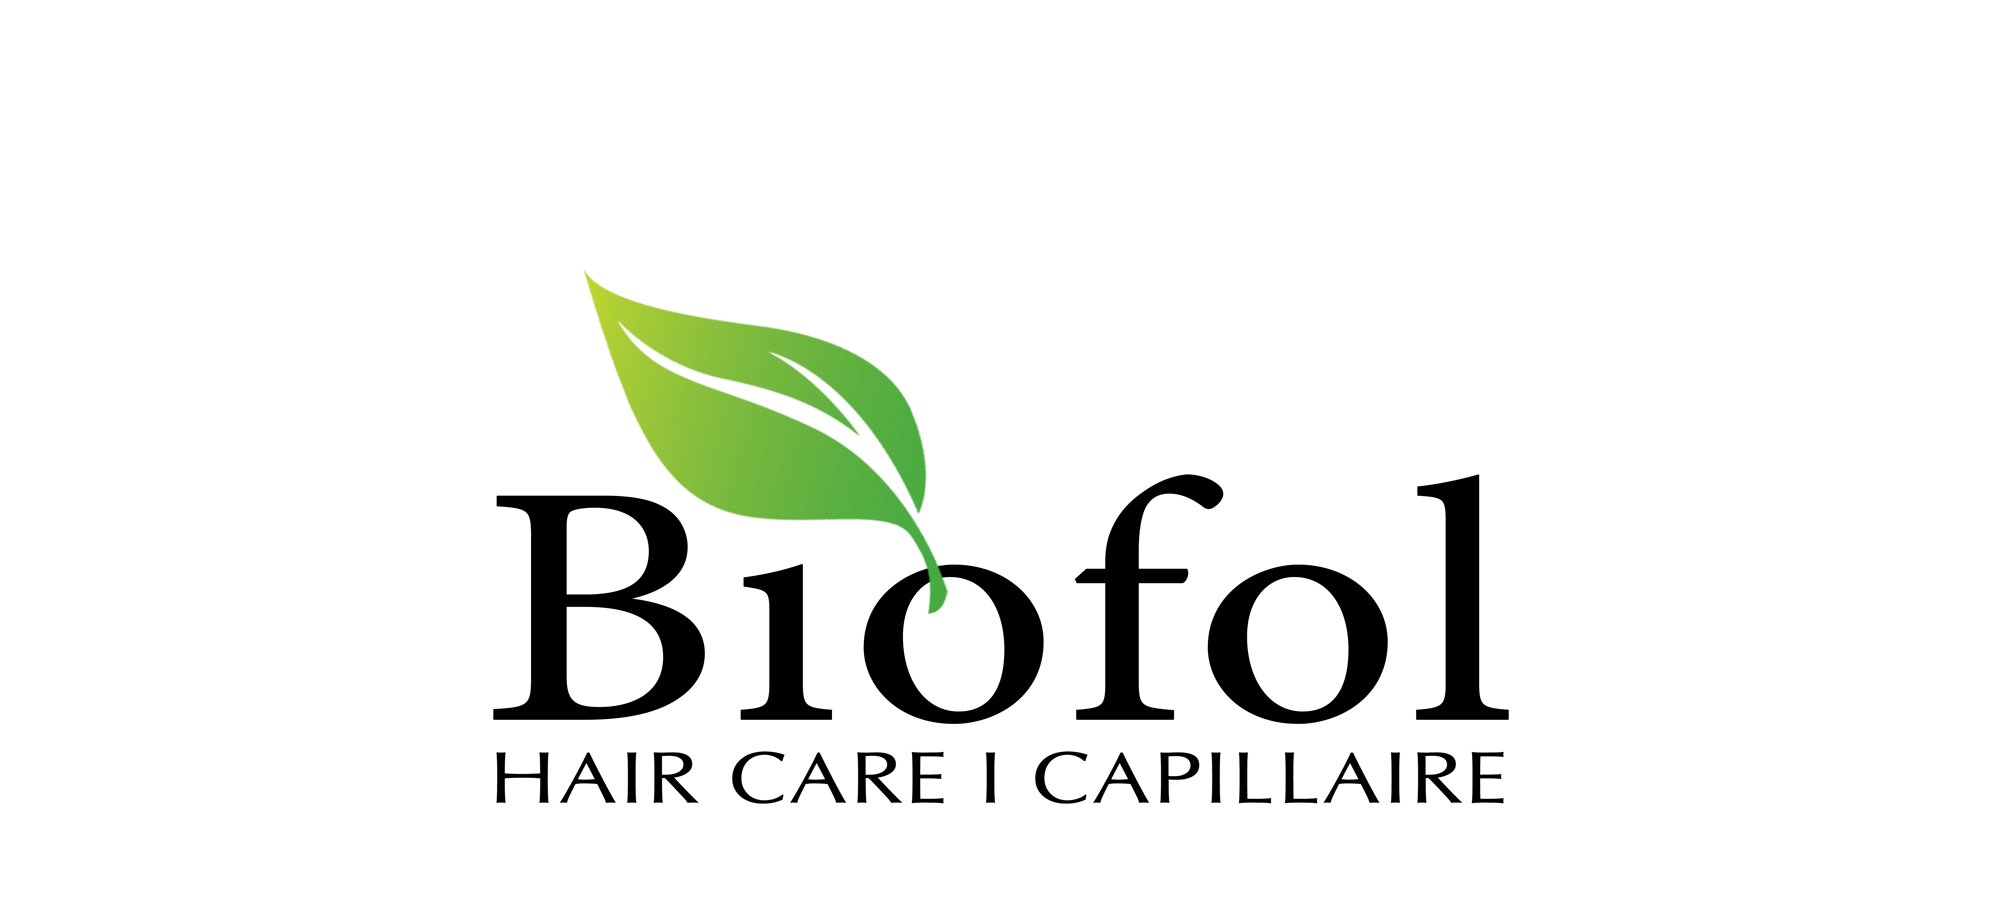 Biofol made in canada with the agency of Sasanian Parsian kohan IN IRAN